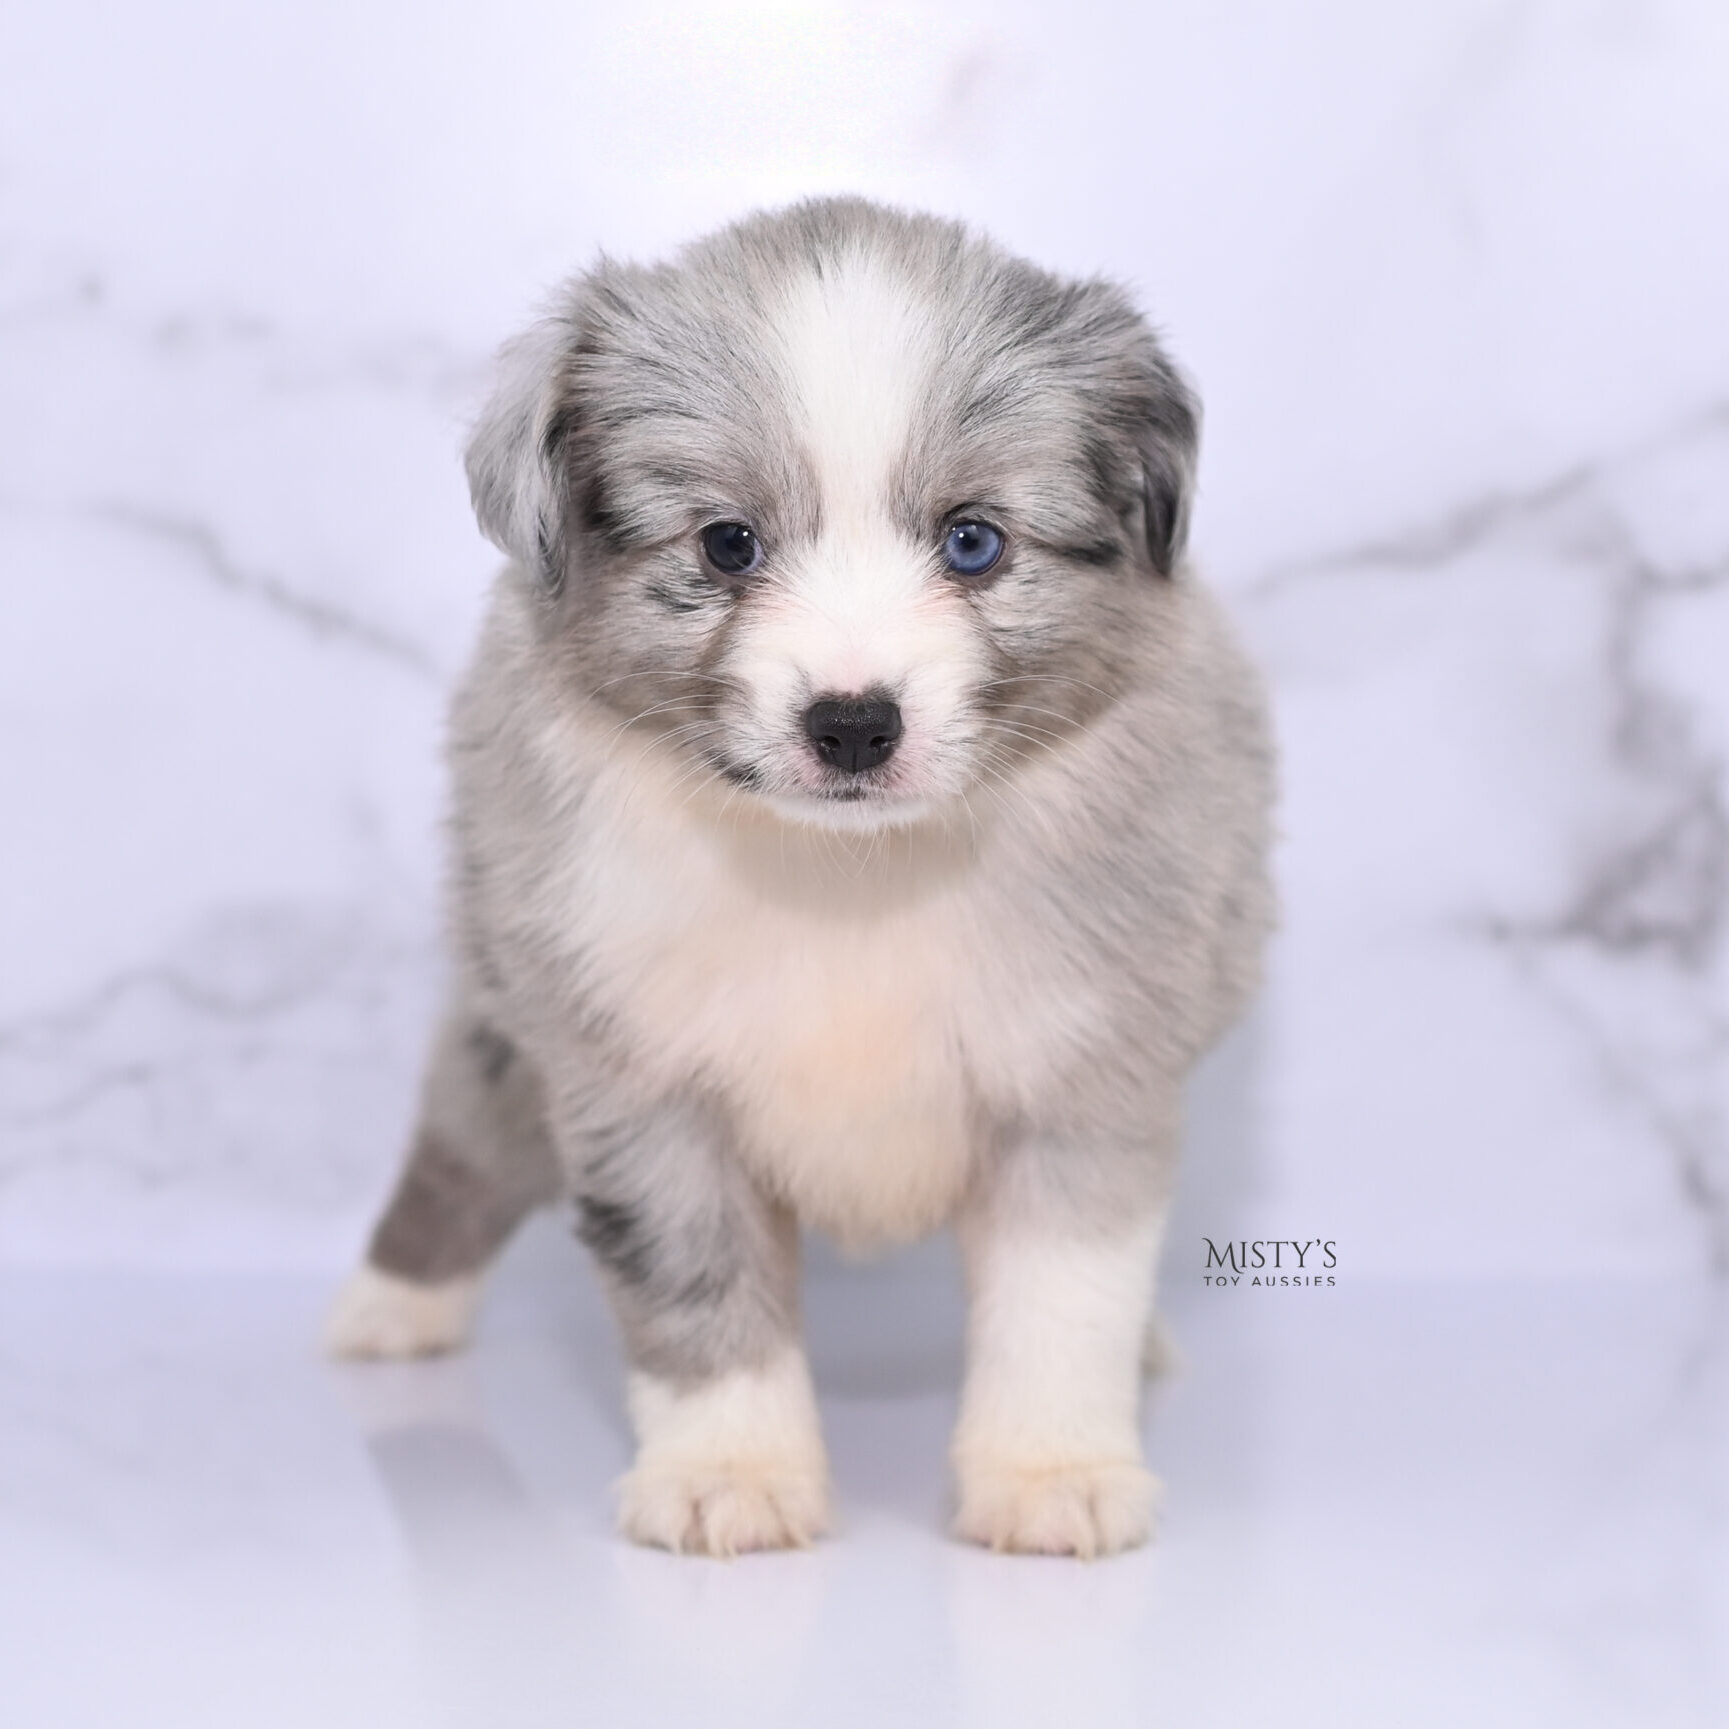 https://www.mistystoyaussies.com/wp-content/uploads/bb-plugin/cache/mistys-toy-aussies-web-puppies-lilou-6-weeks33-square-3f2027ae2acc3aeaa3d70be096bf69e3-.jpg